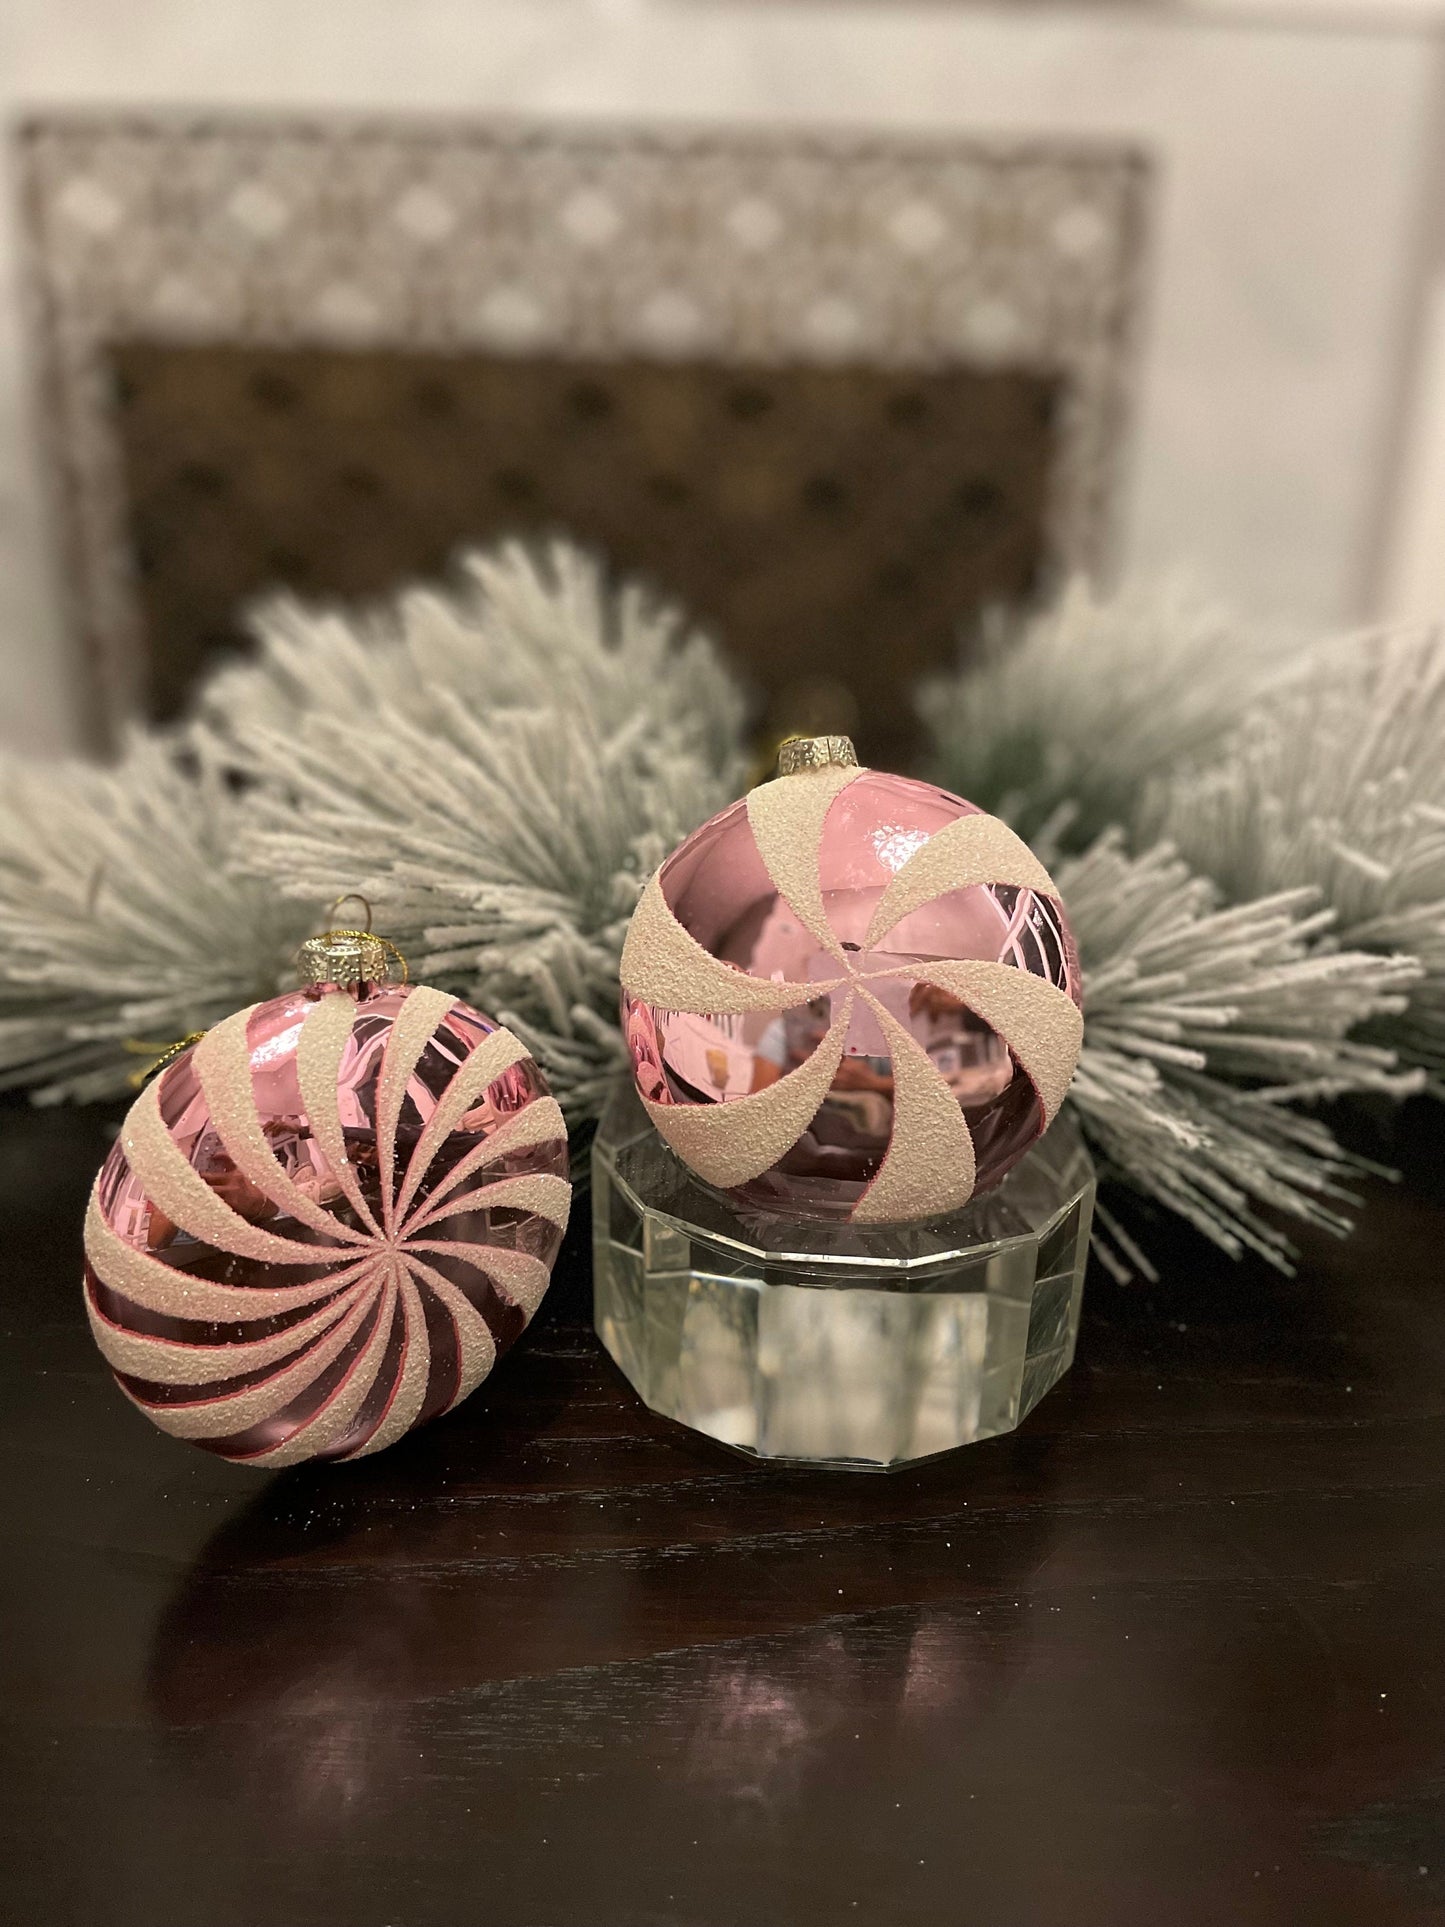 Set of 2. 4" glass peppermint candy disk ornament. Pink.